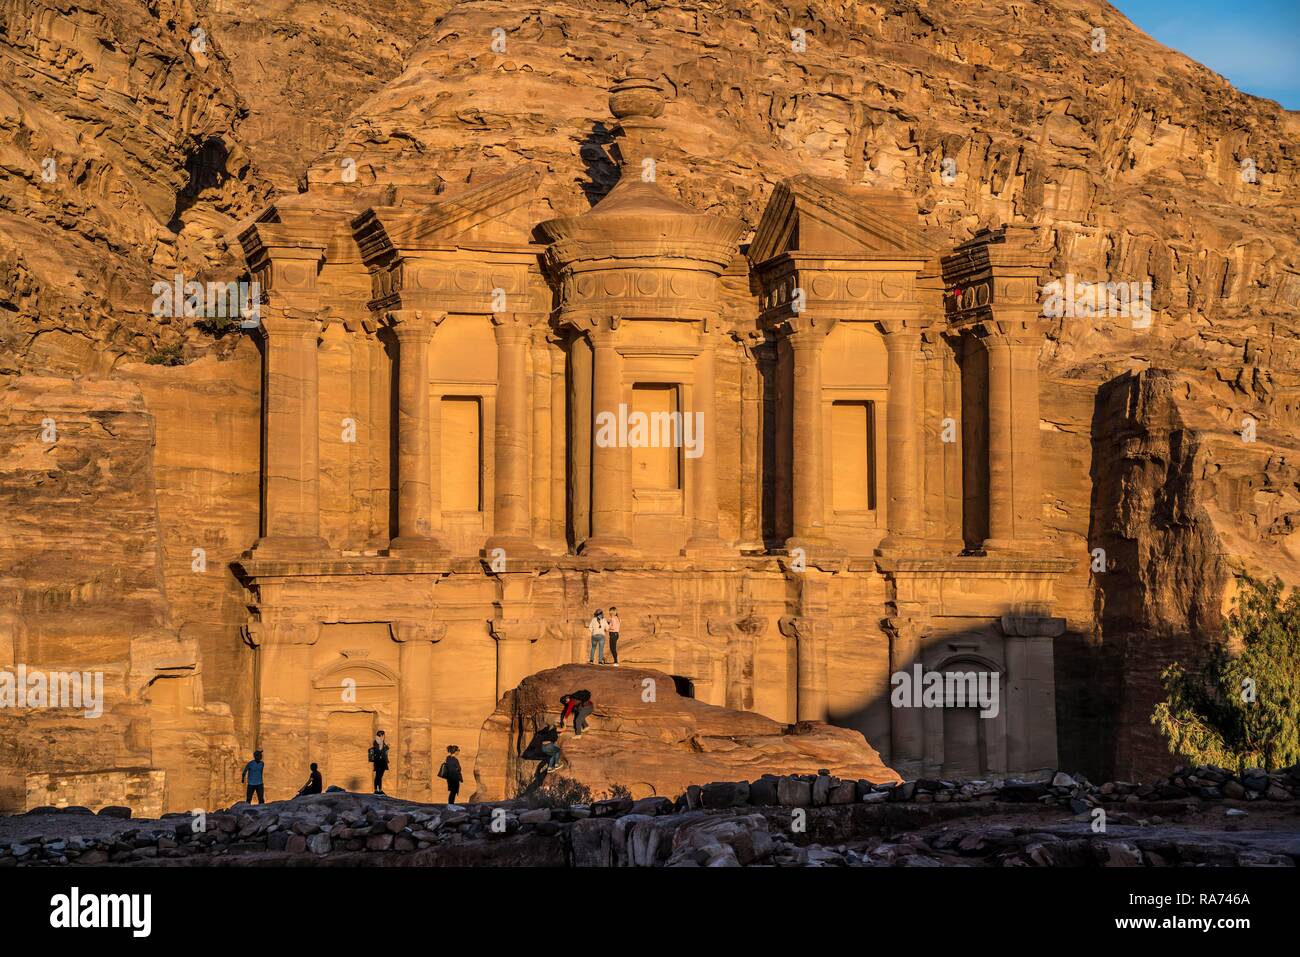 Visitors in front of the rock temple Monastery Ad Deir, Petra, Jordan Stock Photo